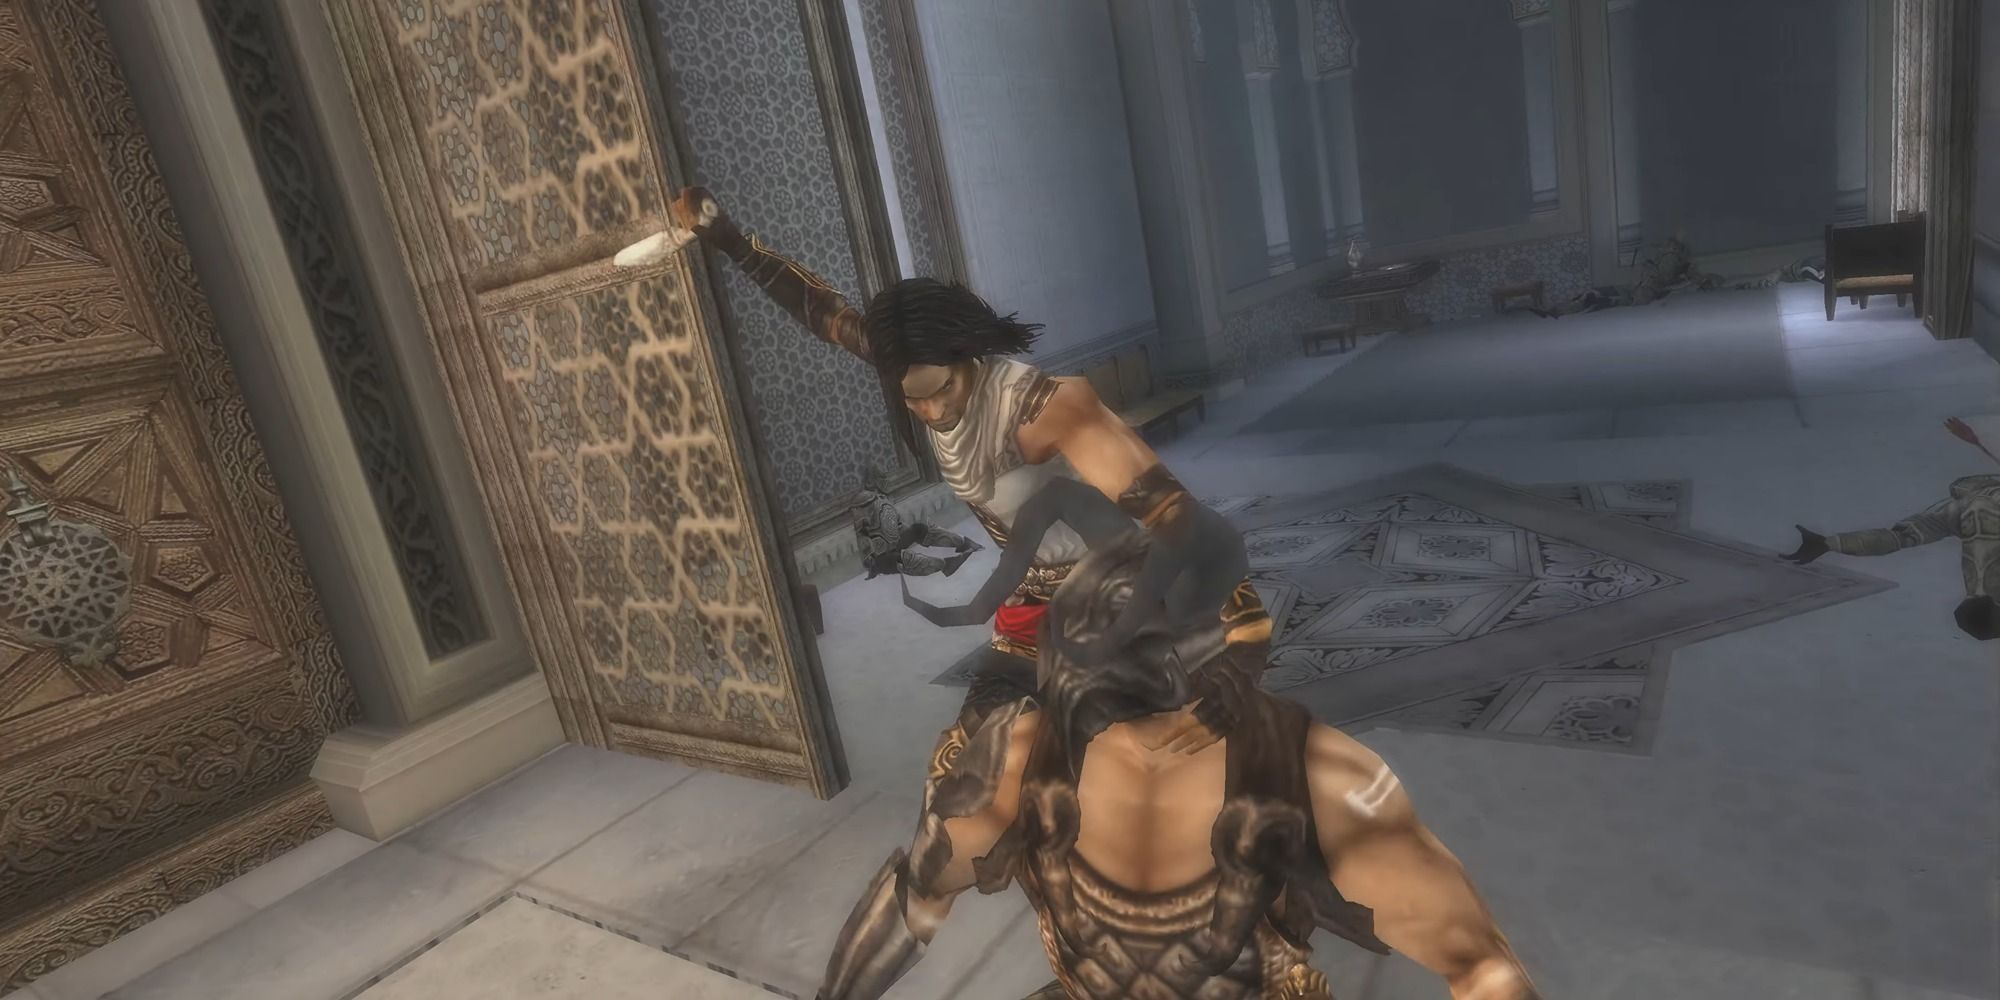 Prince proceeding to stealth kill an enemy in Prince of Persia - The Two Thrones